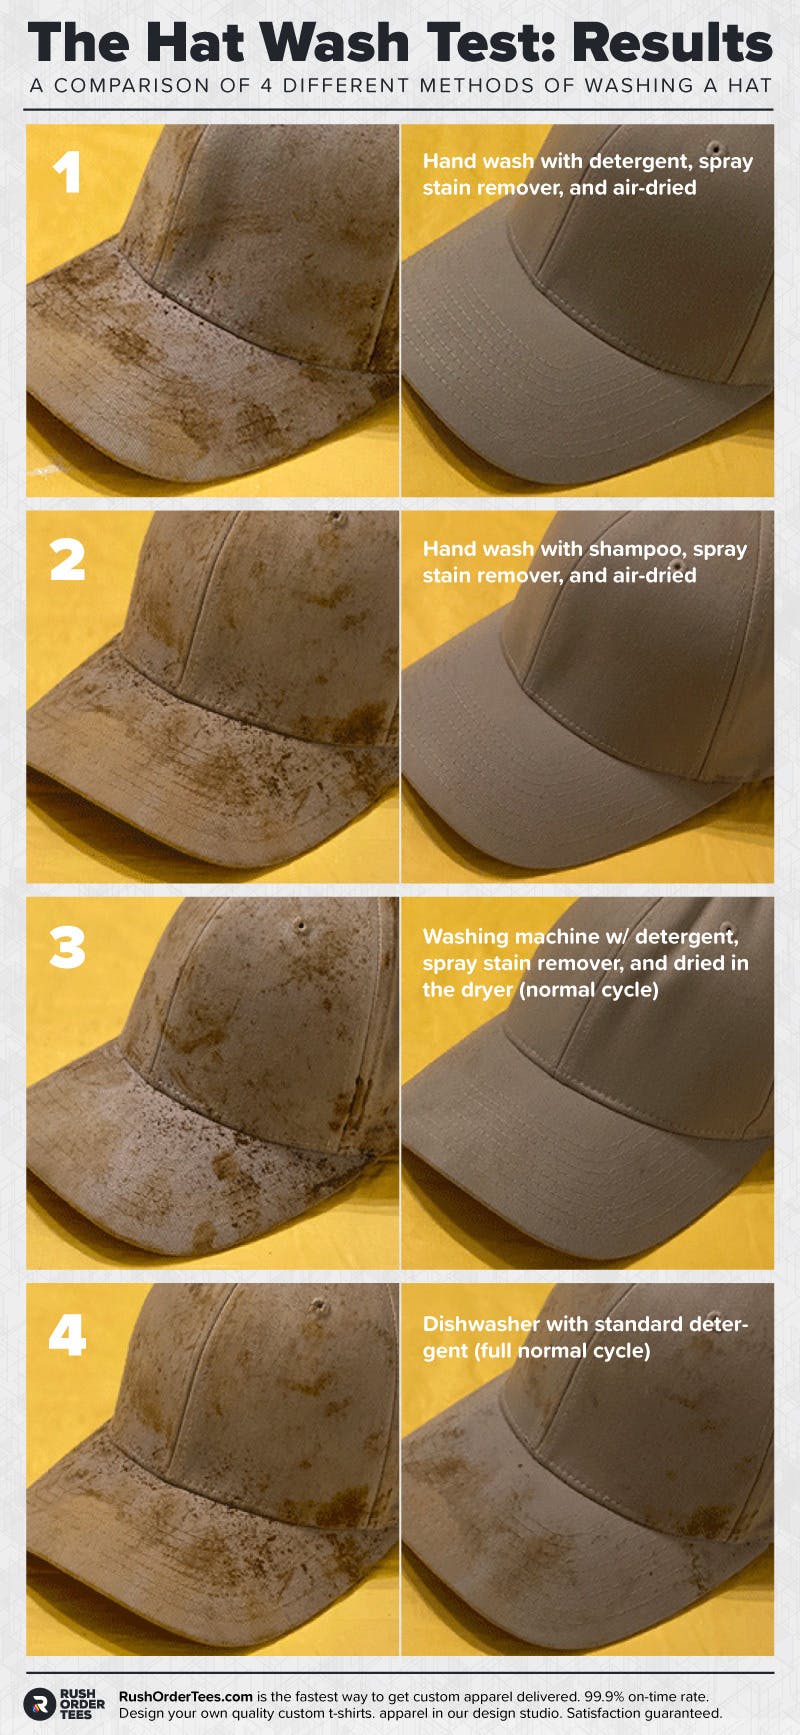 How to Wash a Baseball Cap: 3 Easy Methods